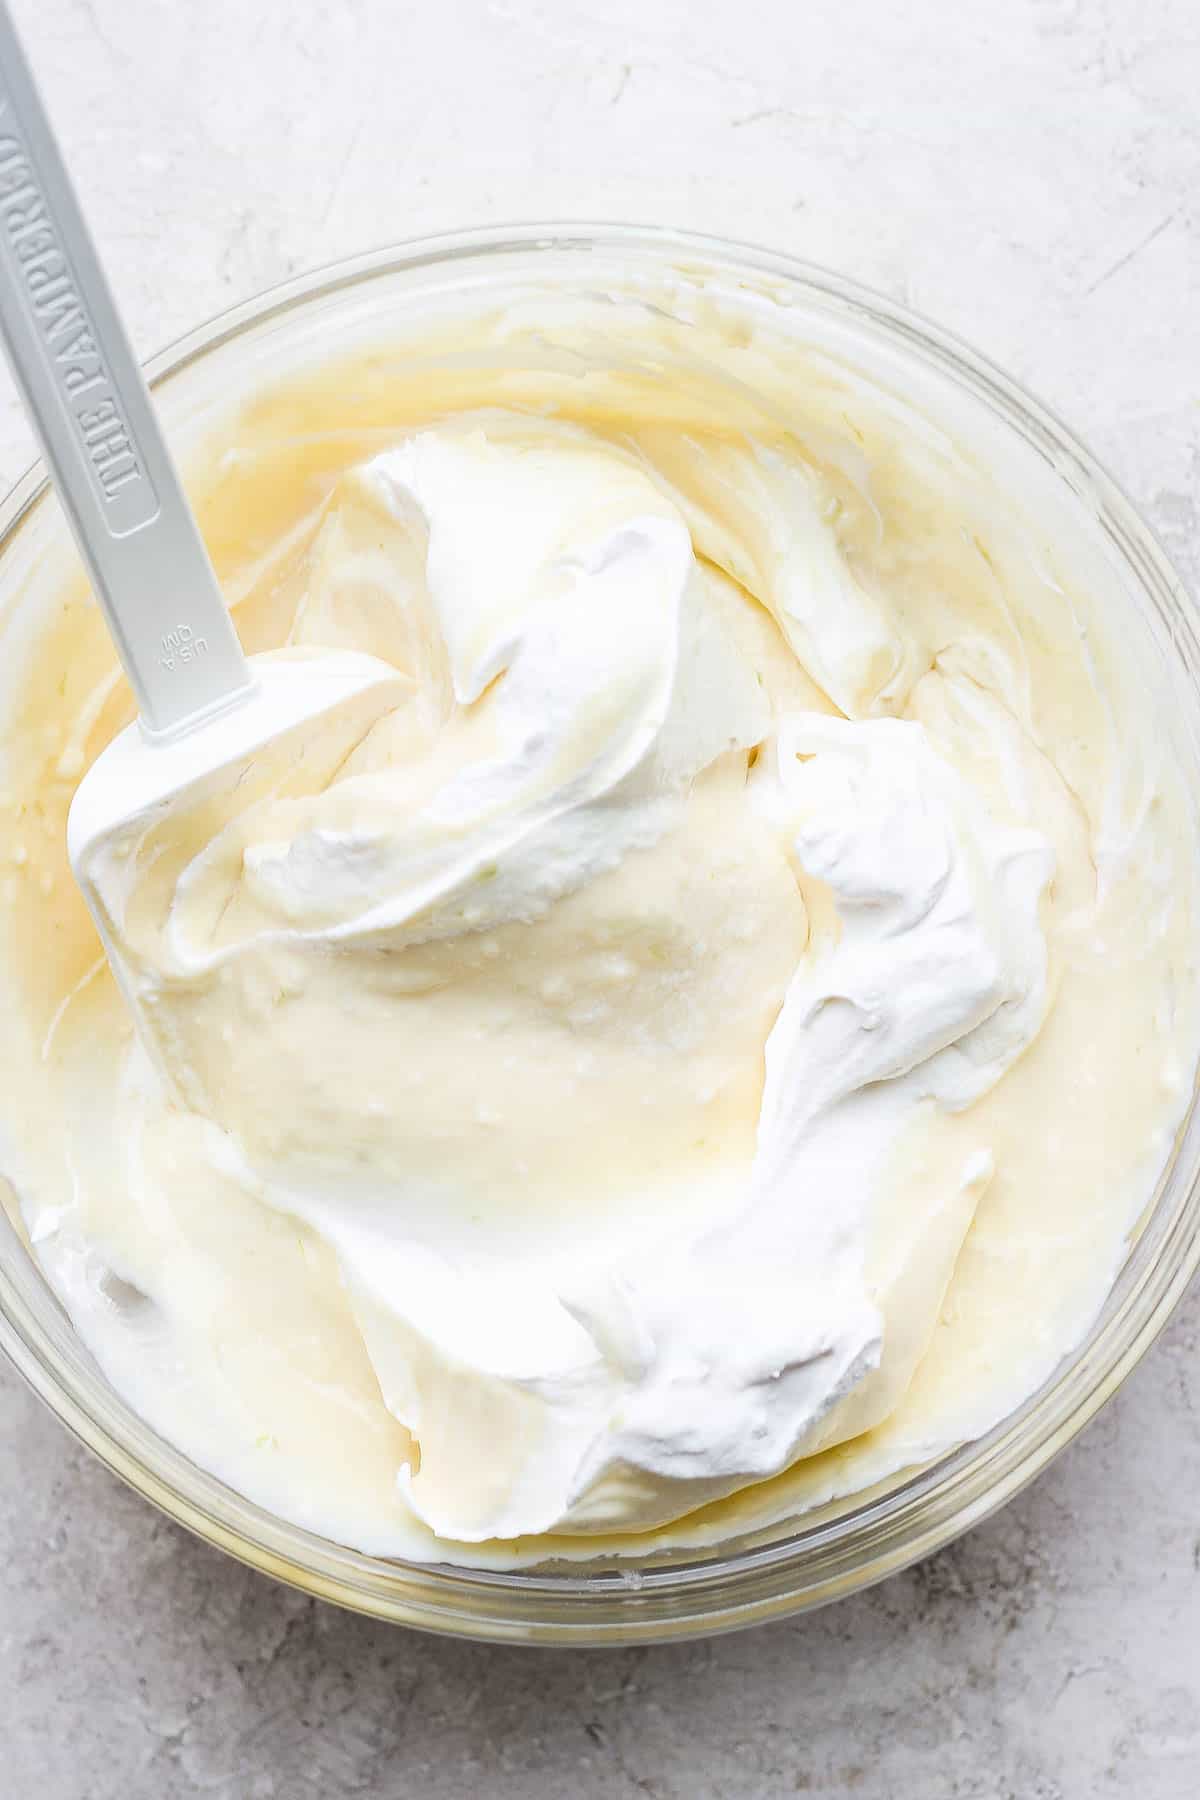 Cream cheese, lime juice, lime zest, cool whip and sweetened condensed milk in a mixing bowl.